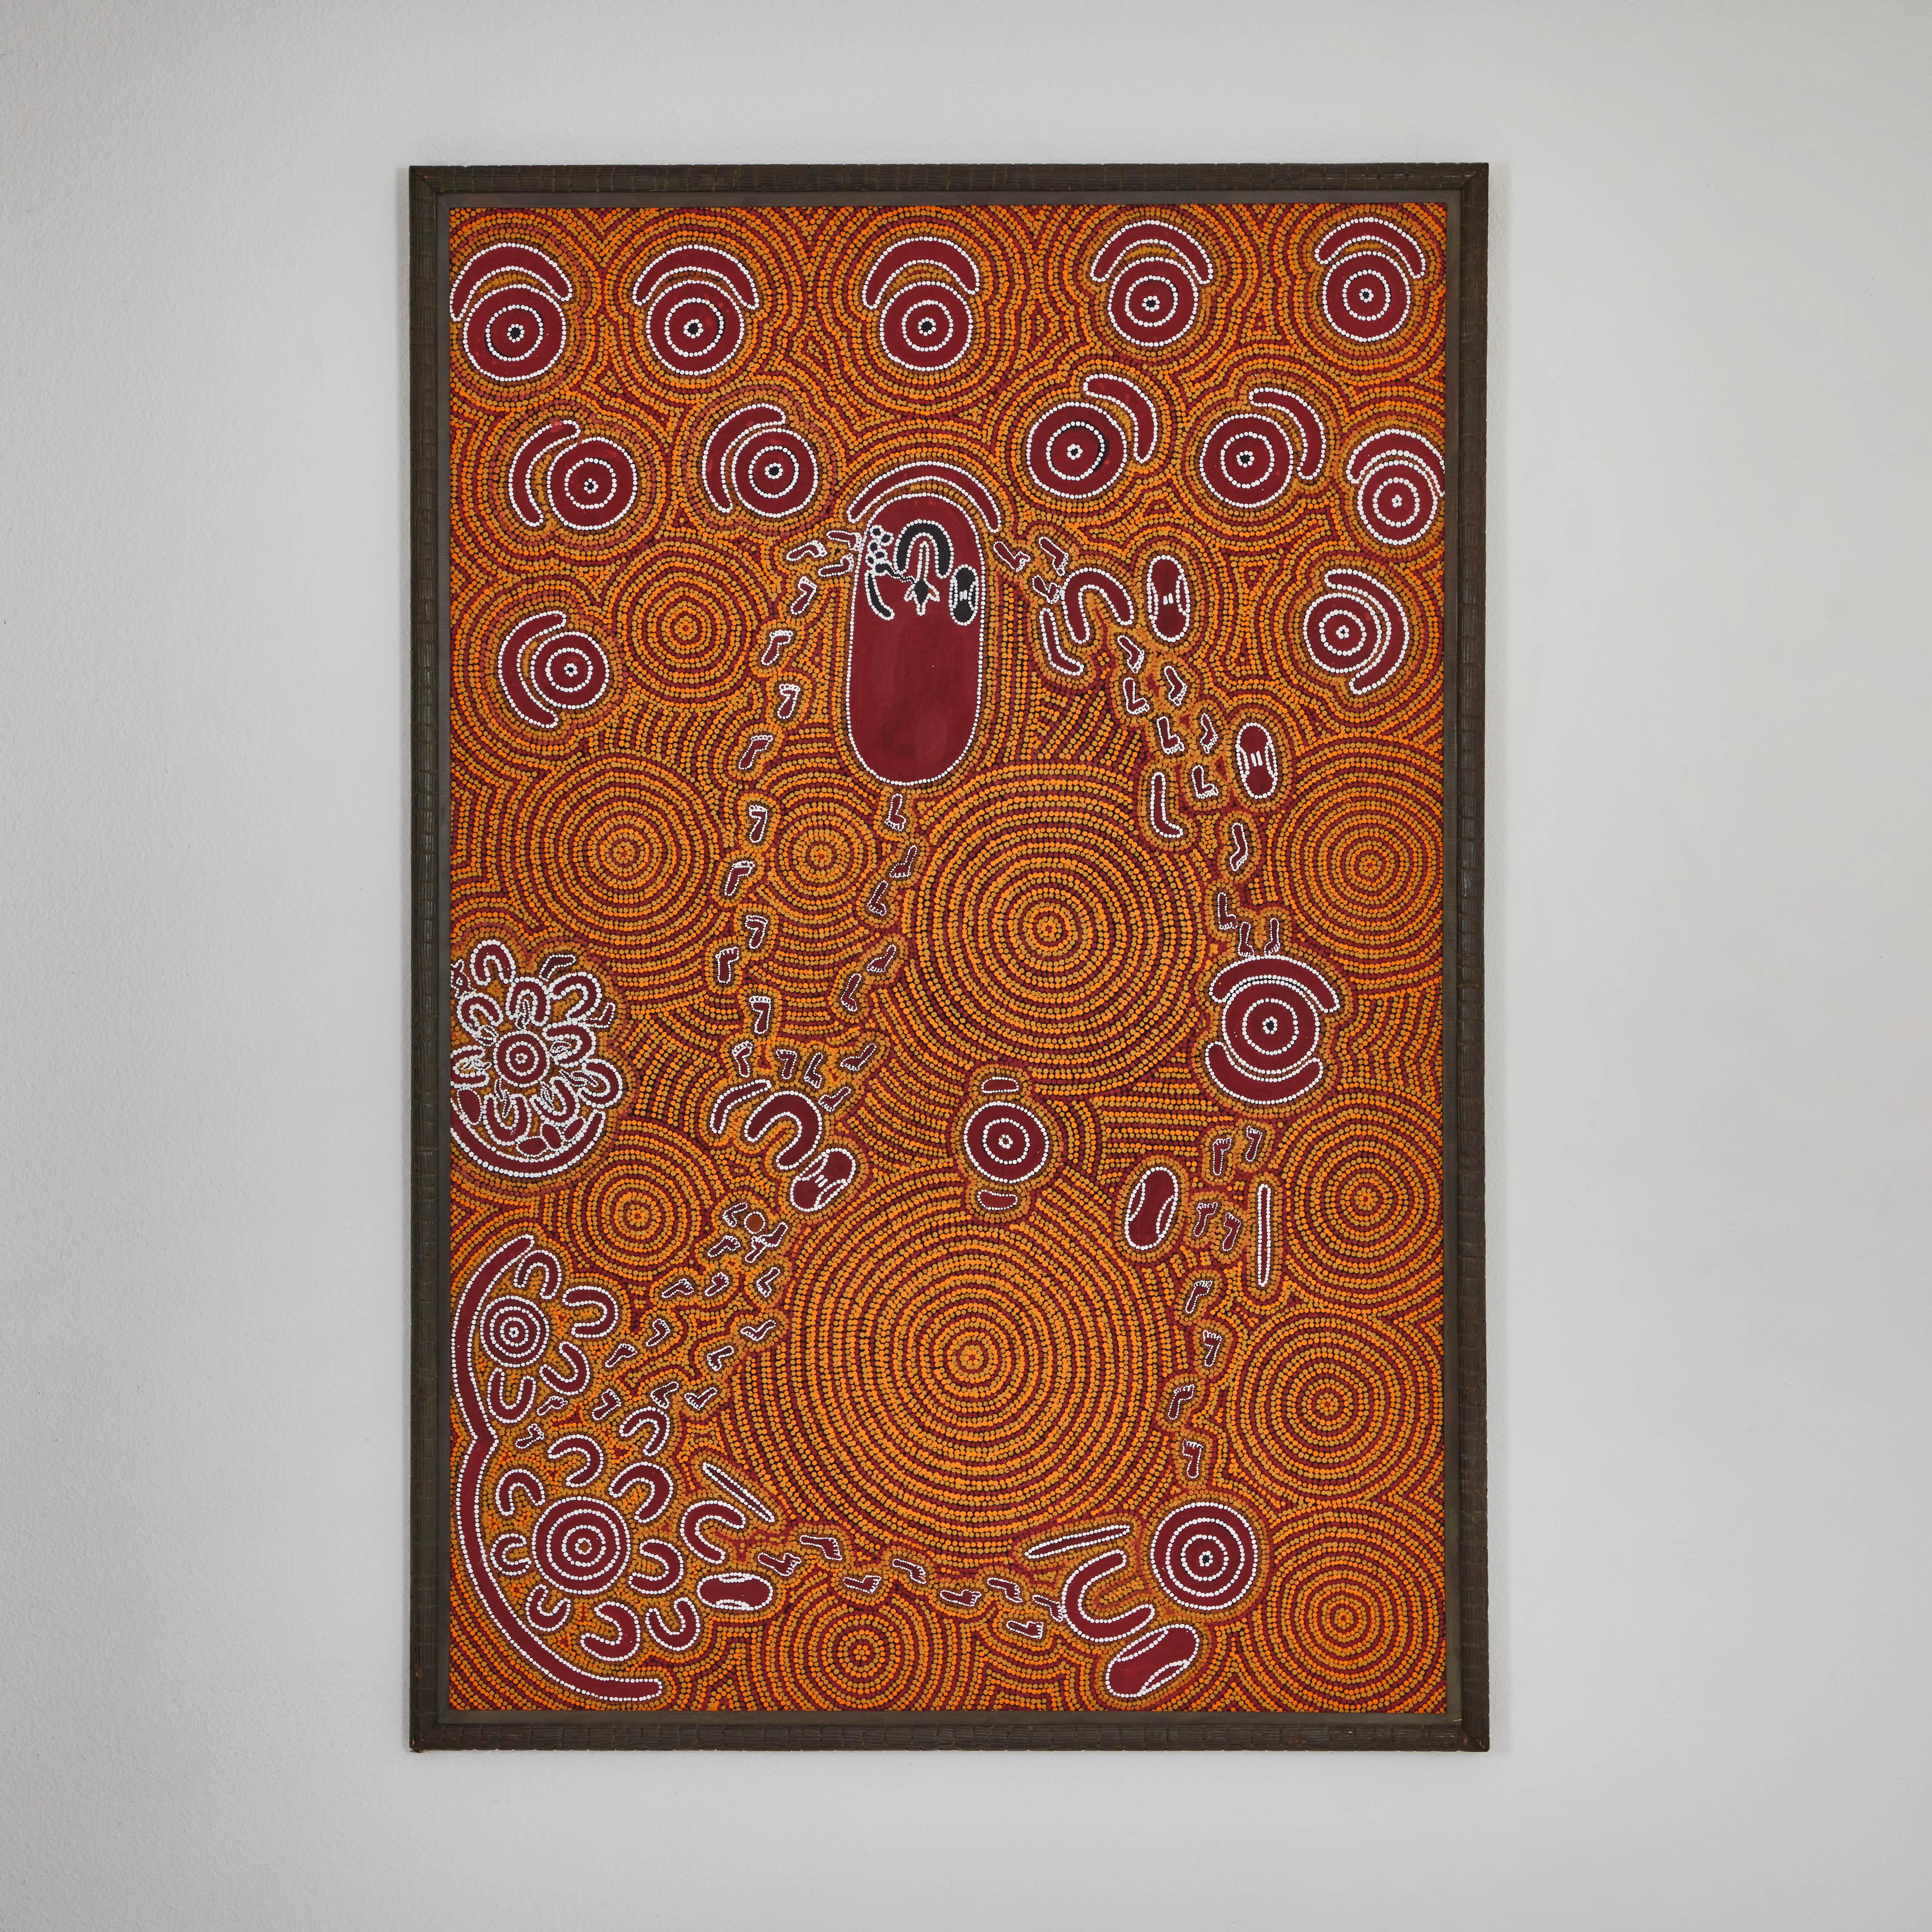 This is a beautiful Aboriginal Jukurrpa (dreaming story) by P Andrea and Kathleen 
Nungarray Martin P. Both artist are a part of the Warlukurlangu Artists of Yuendumu, a prominent Aboriginal owned art center in Central Australia. Motiffs and